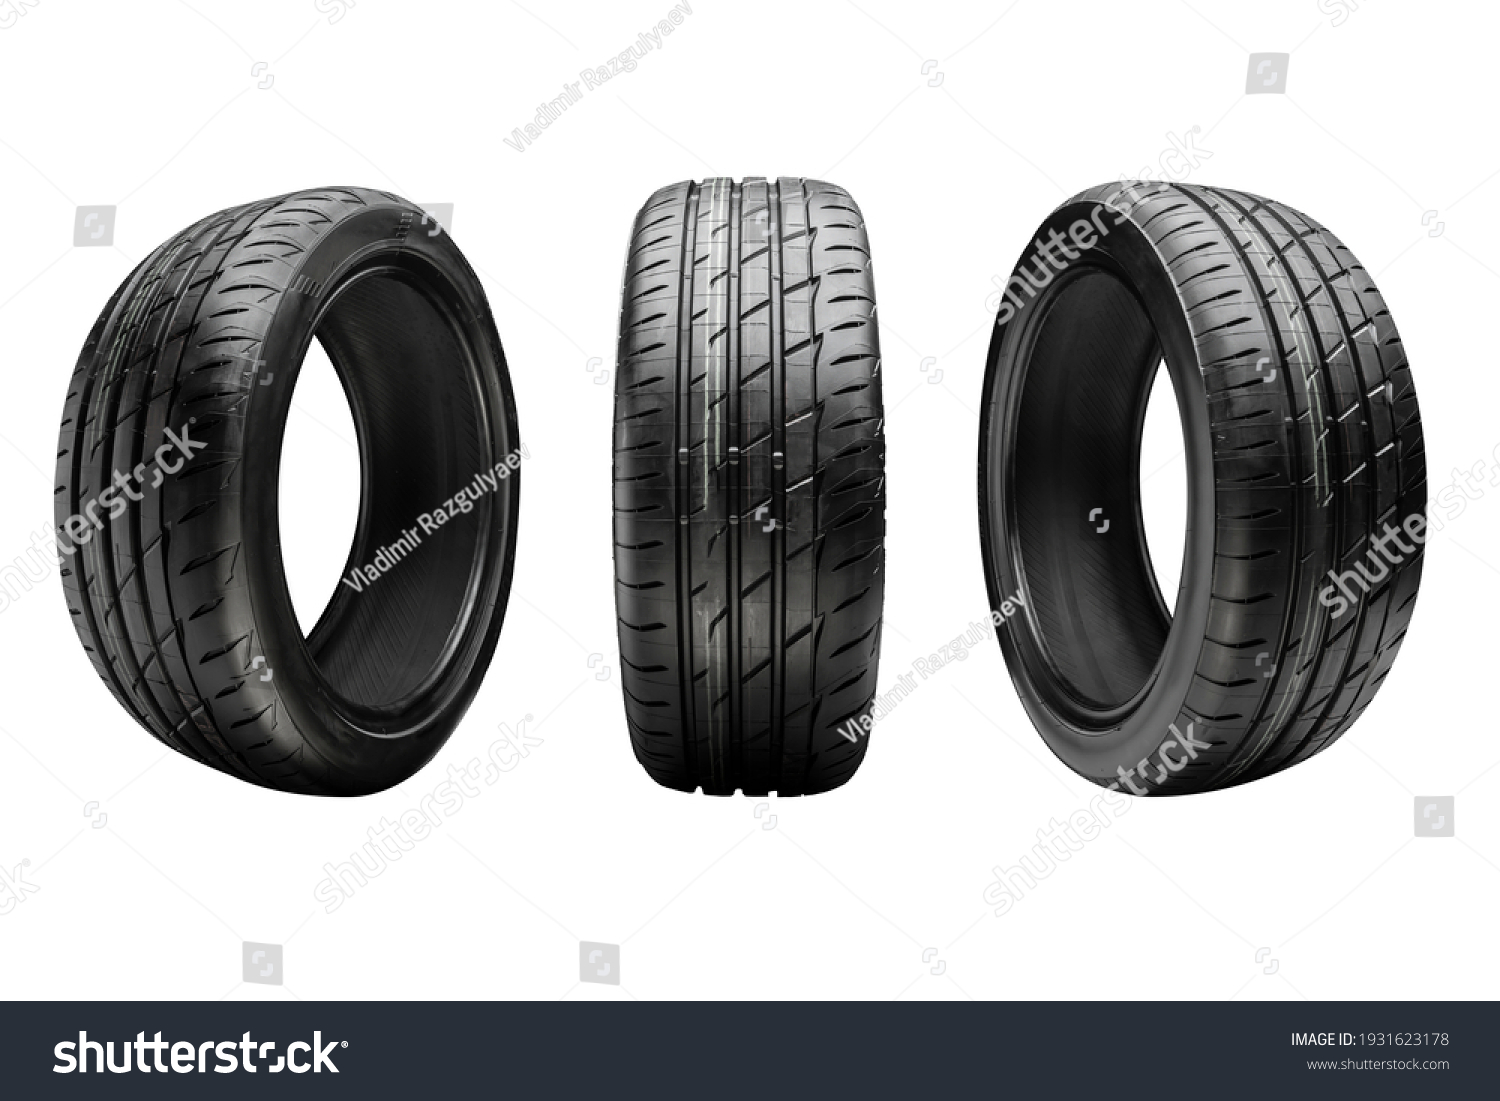 three new summer tires, isolate on a white background #1931623178